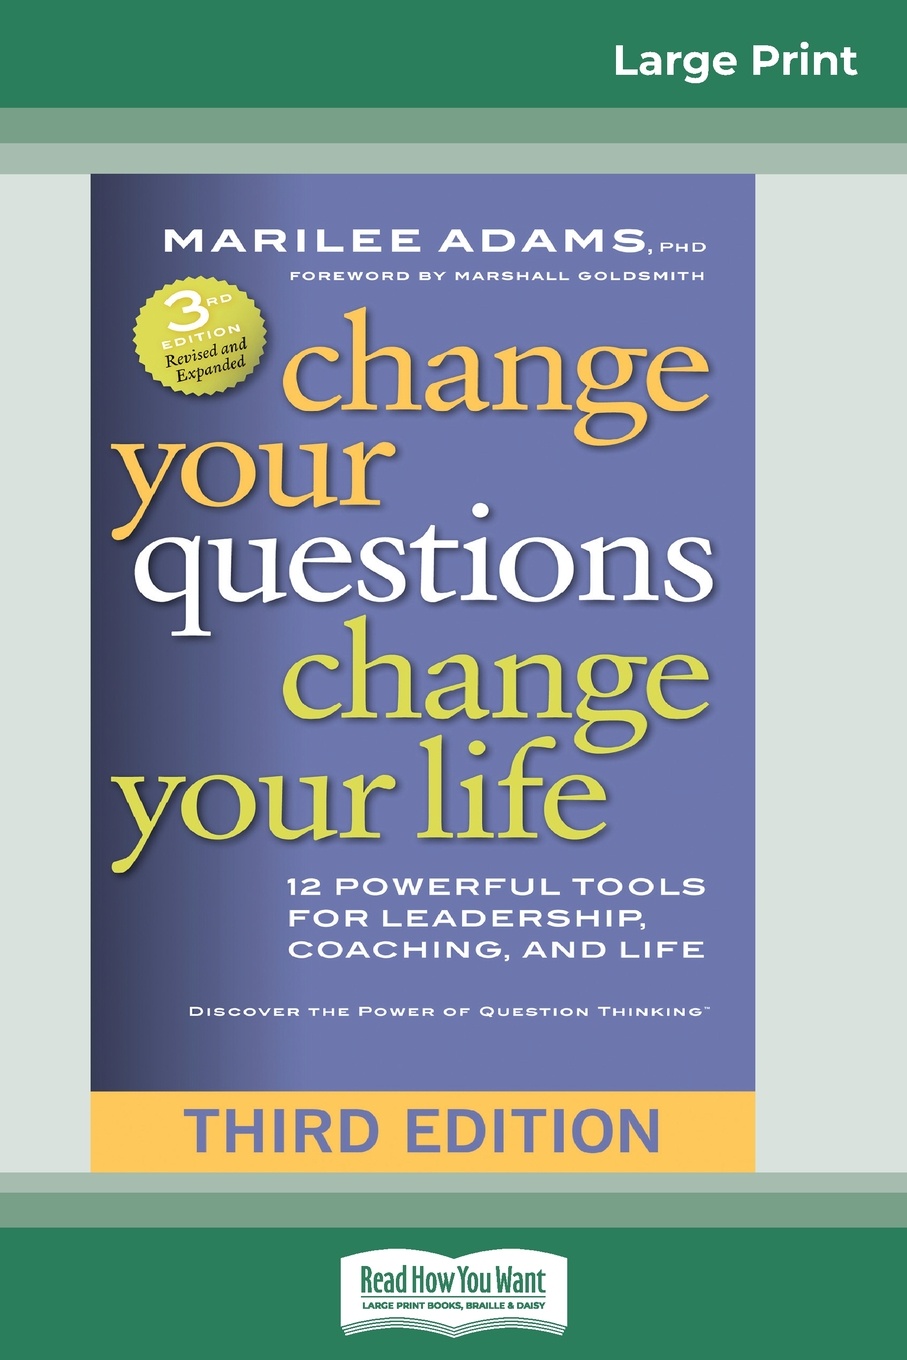 Change Your Questions, Change Your Life. 12 Powerful Tools for Leadership, Coaching, and Life (Third Edition) (16pt Large Print Edition)